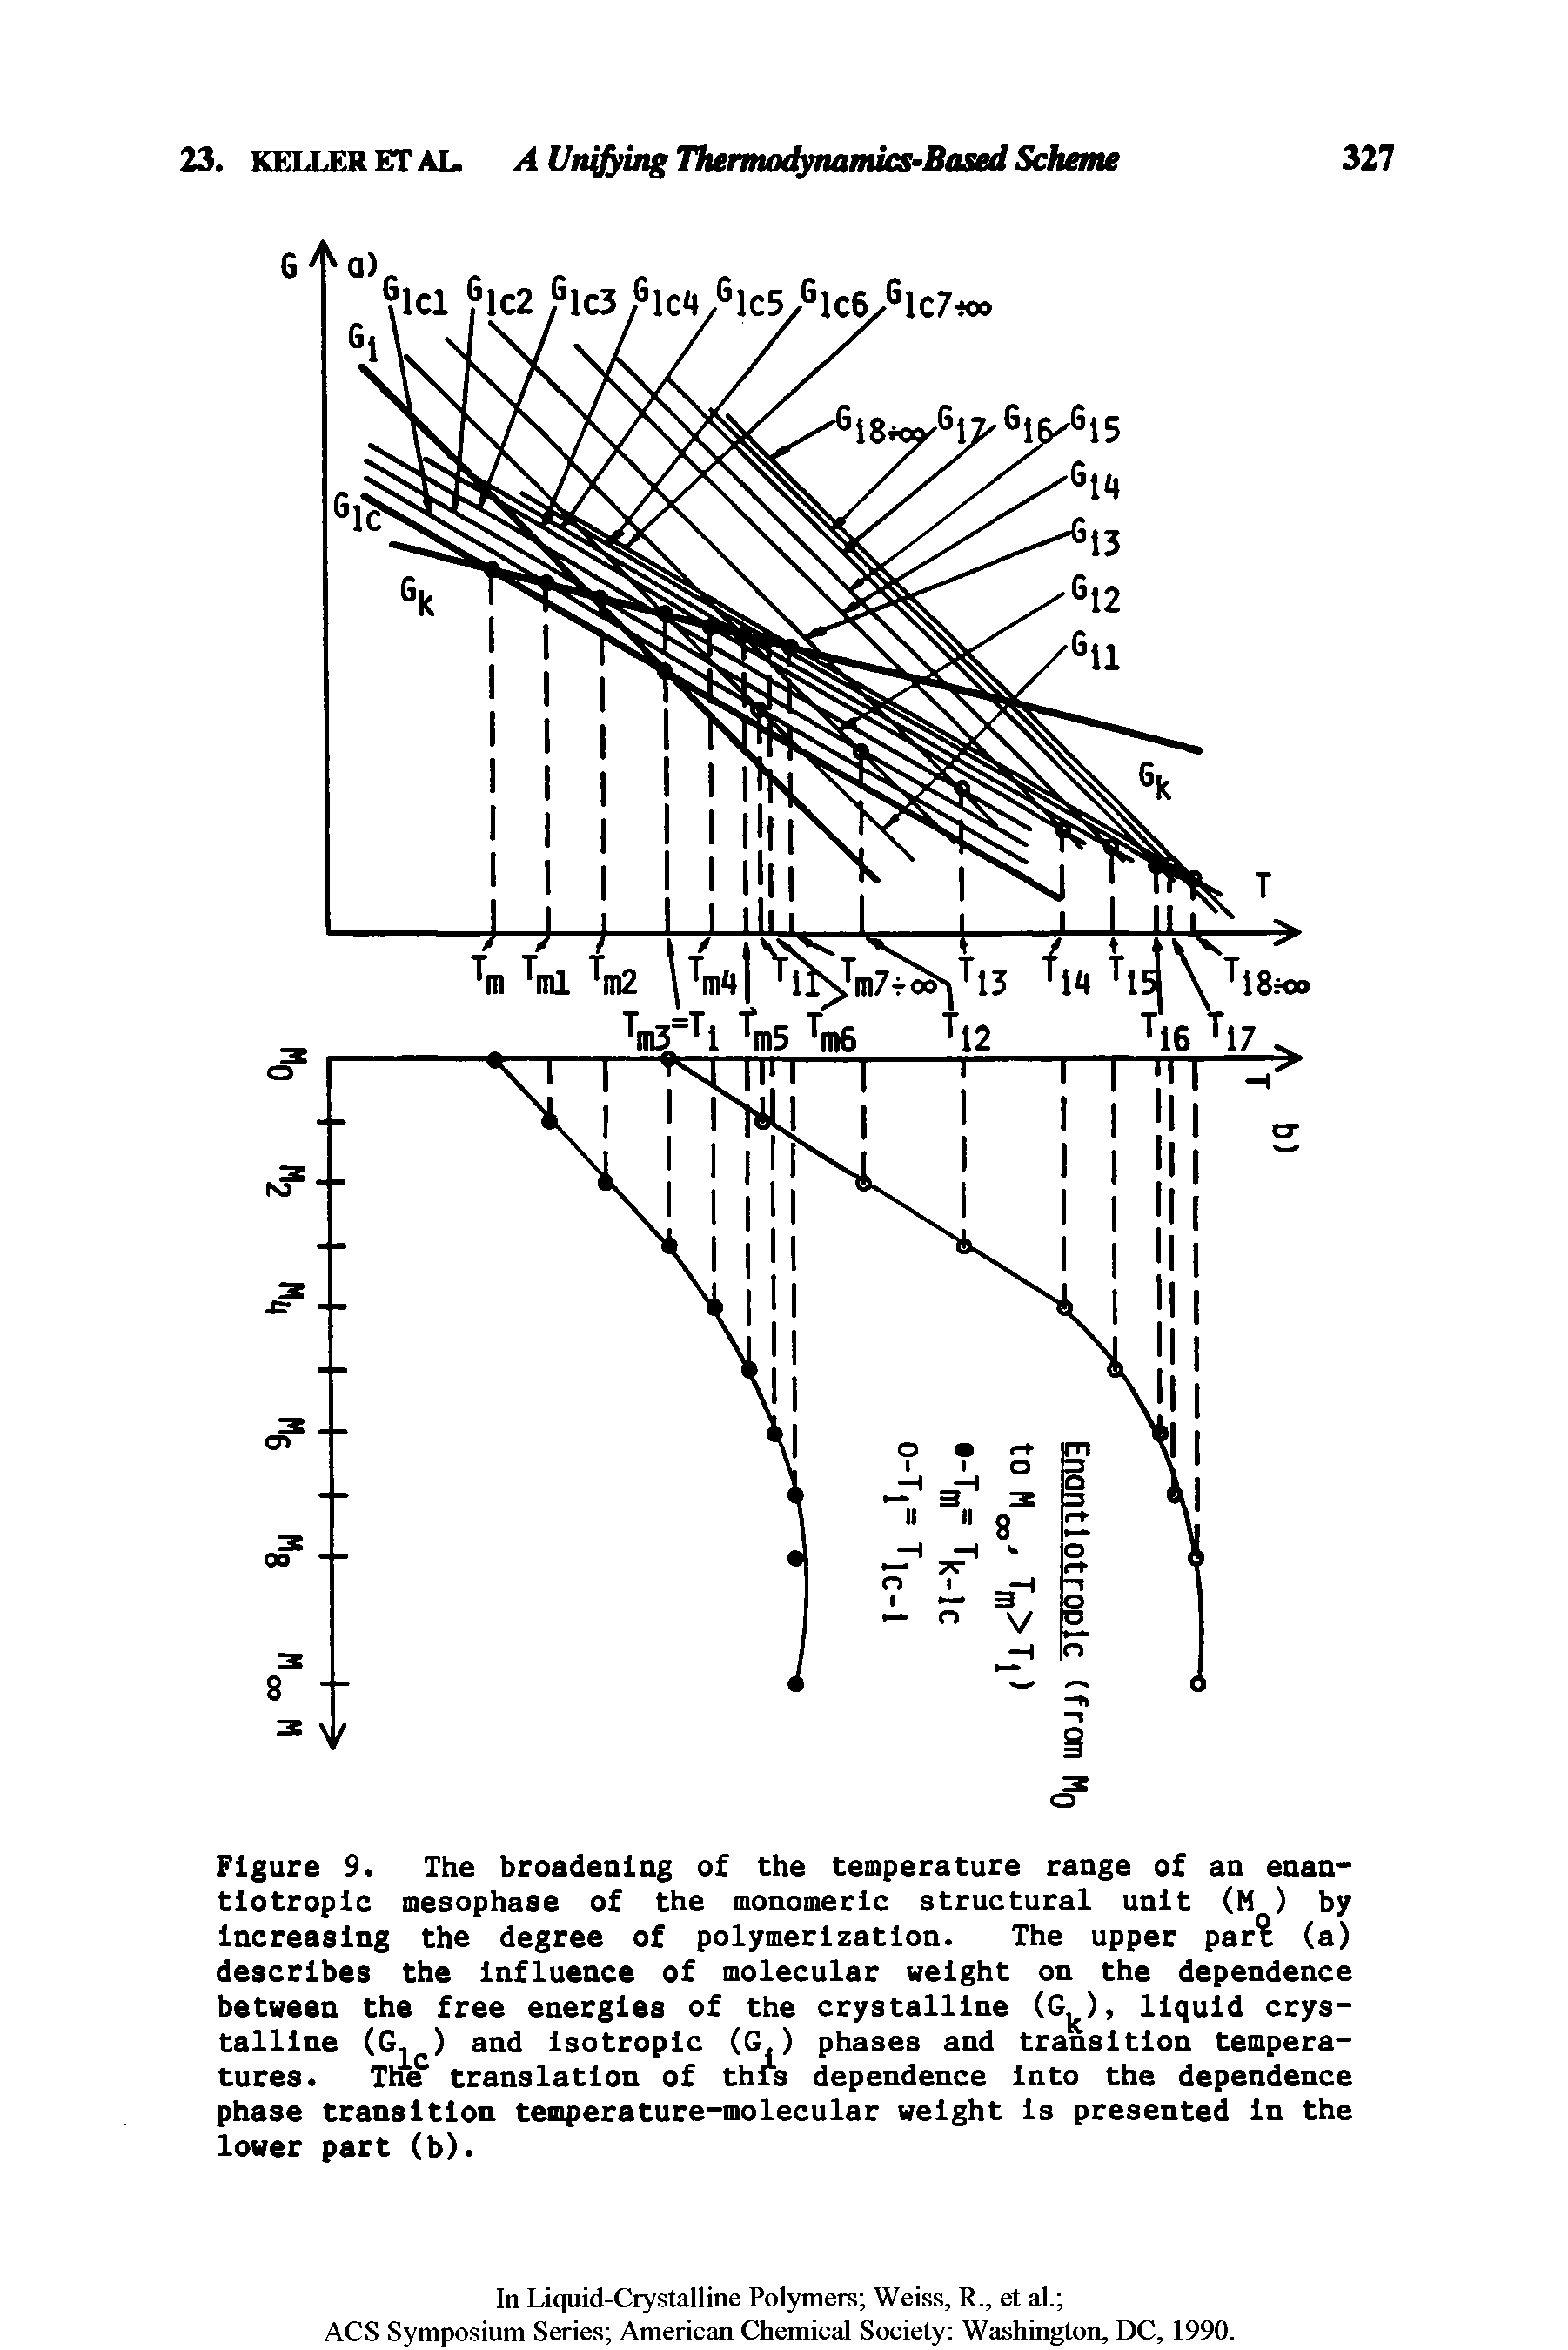 Figure 9. The broadening of the temperature range of an enan-tiotroplc mesophase of the monomeric structural unit (M ) by increasing the degree of polymerization. The upper par (a) describes the influence of molecular weight on the dependence between the free energies of the crystalline (G ), liquid crystalline (G. ) and isotropic (G.) phases and transition temperatures. Tne translation of this dependence into the dependence phase transition temperature-molecular weight is presented in the lower part (b).